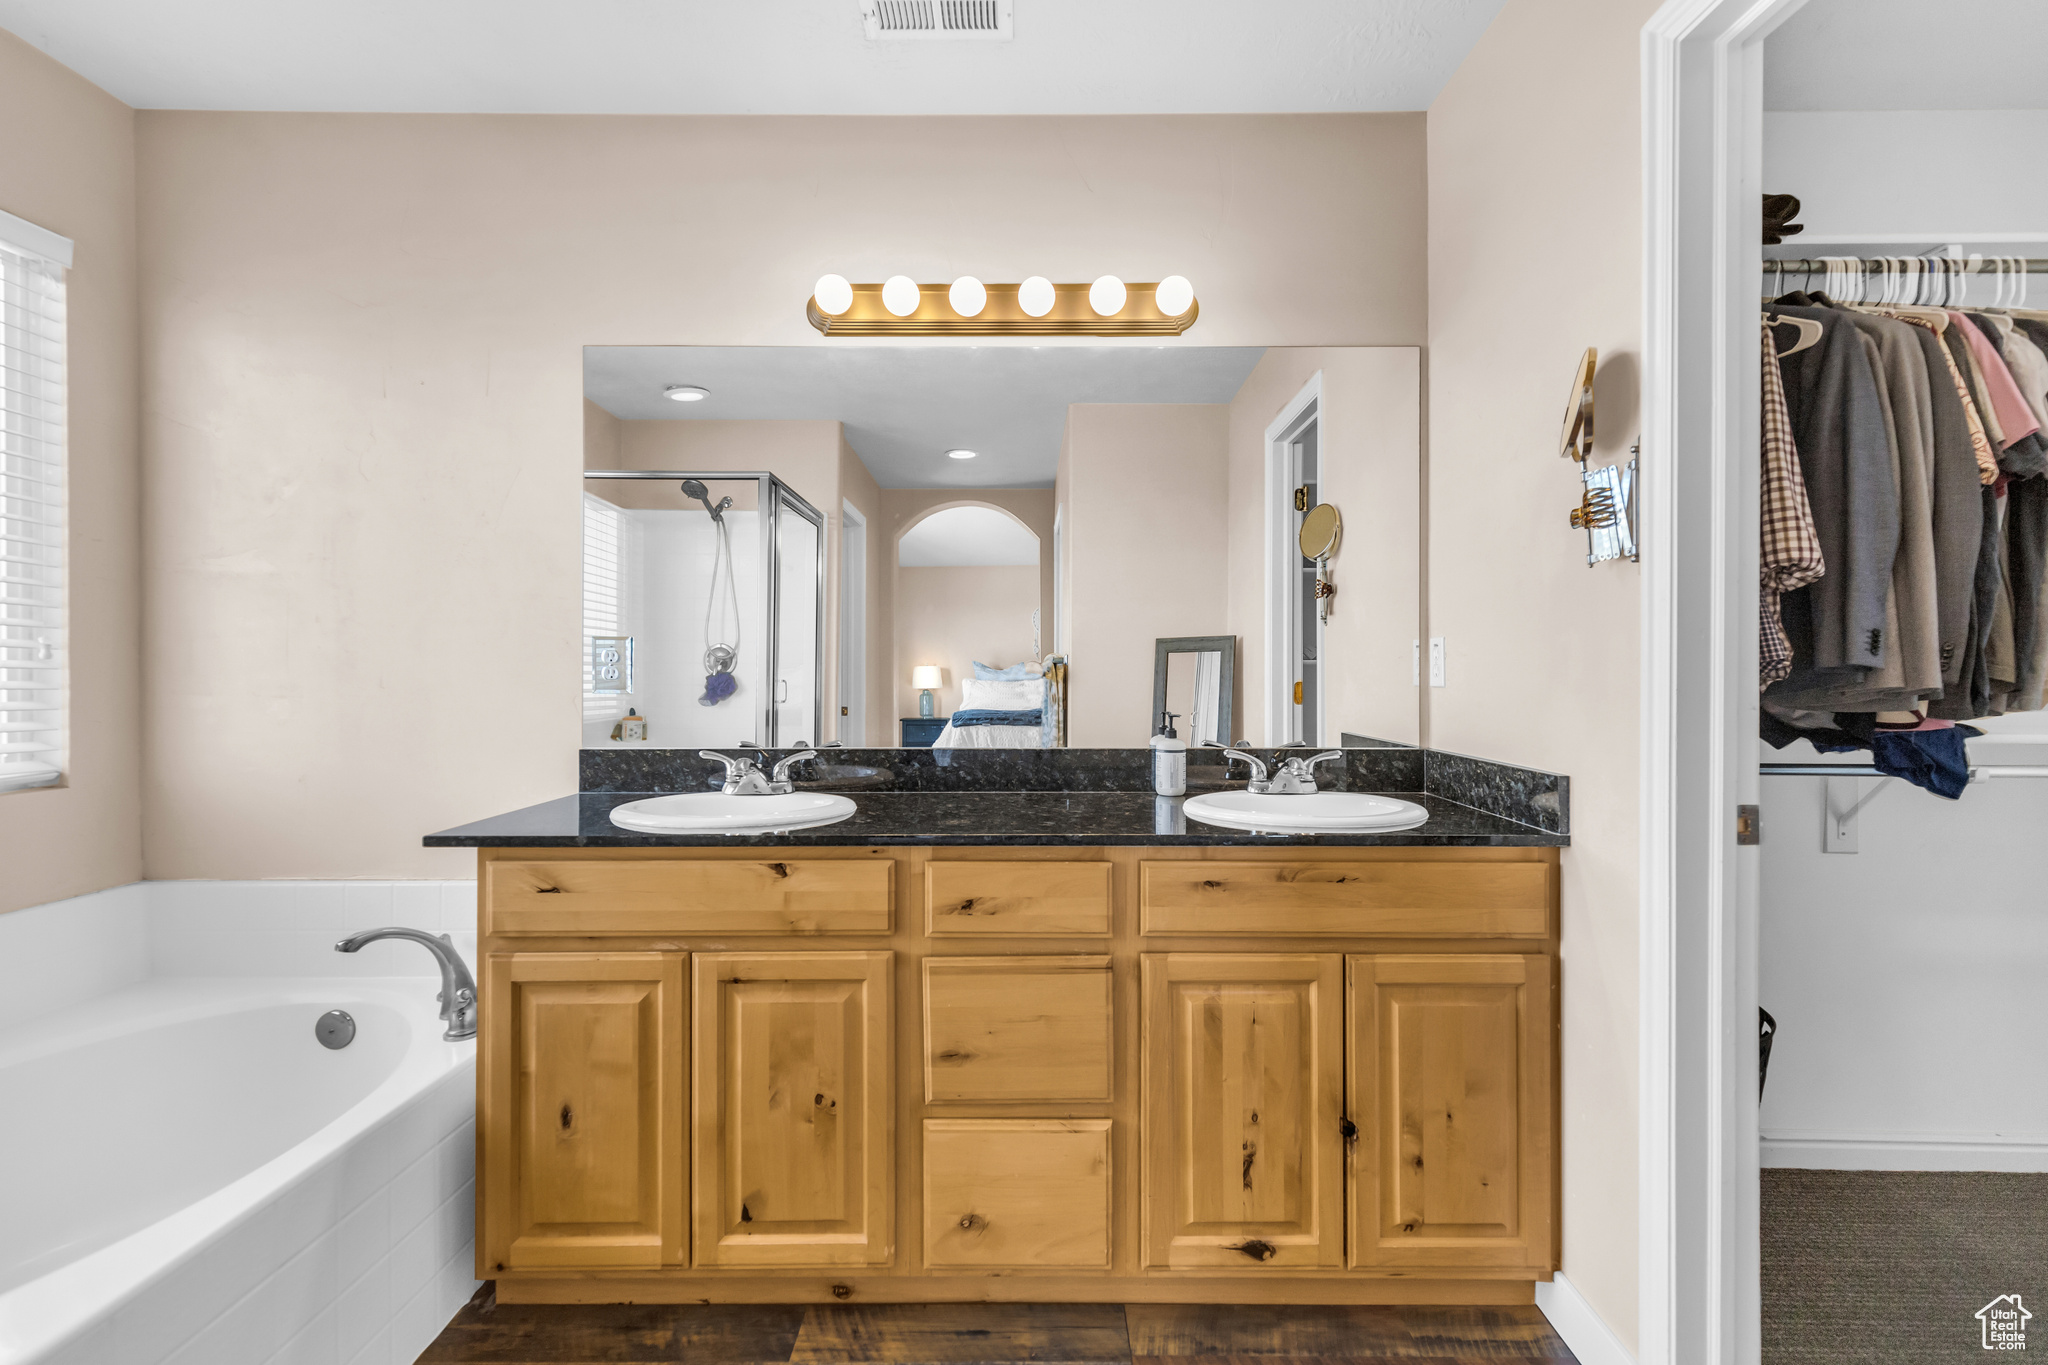 Bathroom with dual sinks, a wealth of natural light, tiled bath, and large vanity